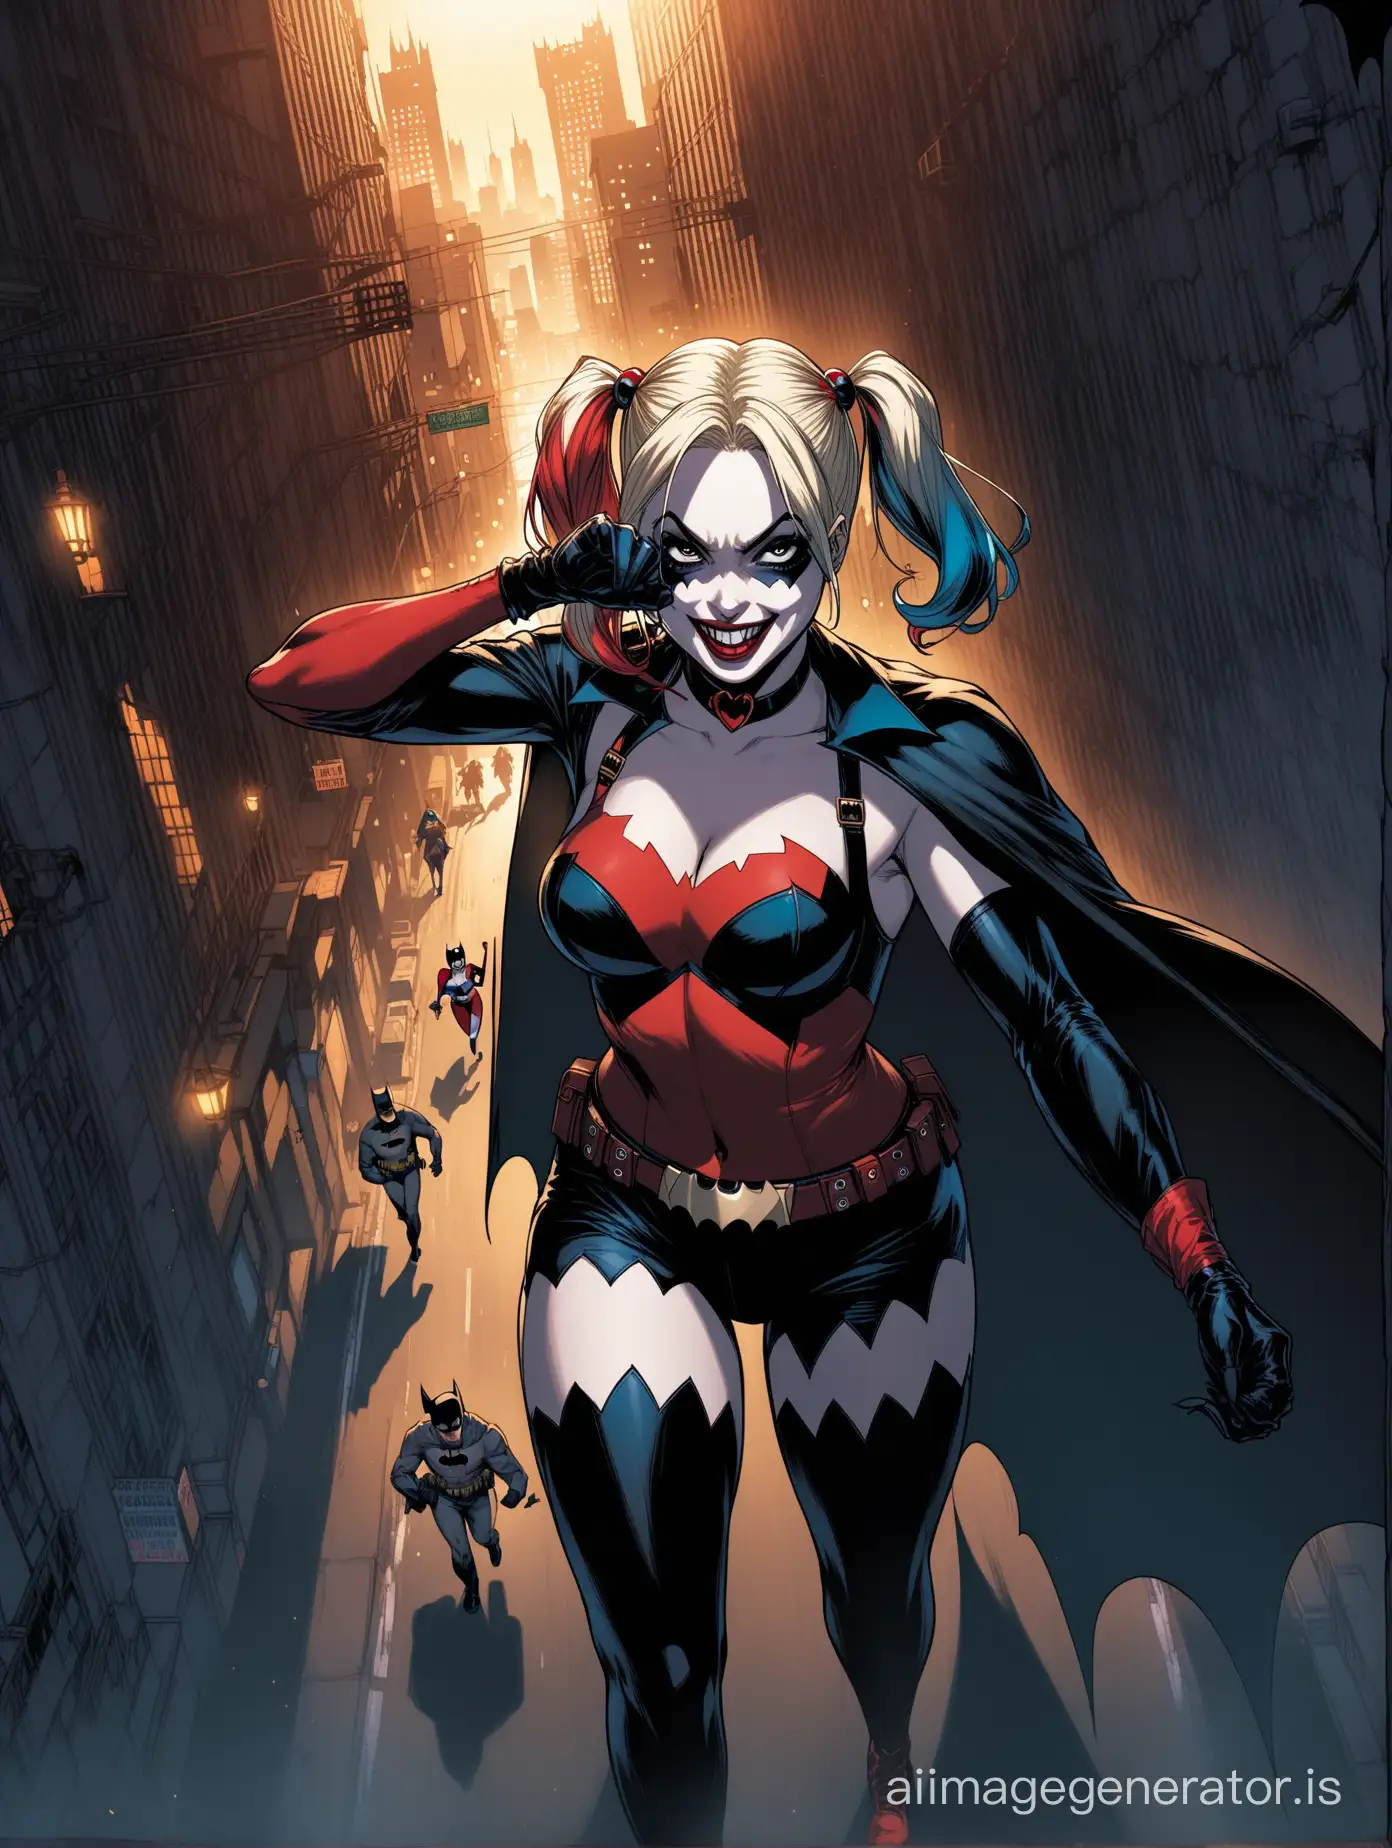 Harley Quinn wreaking havoc on the streets of Gotham, Batman lurking in the shadows.